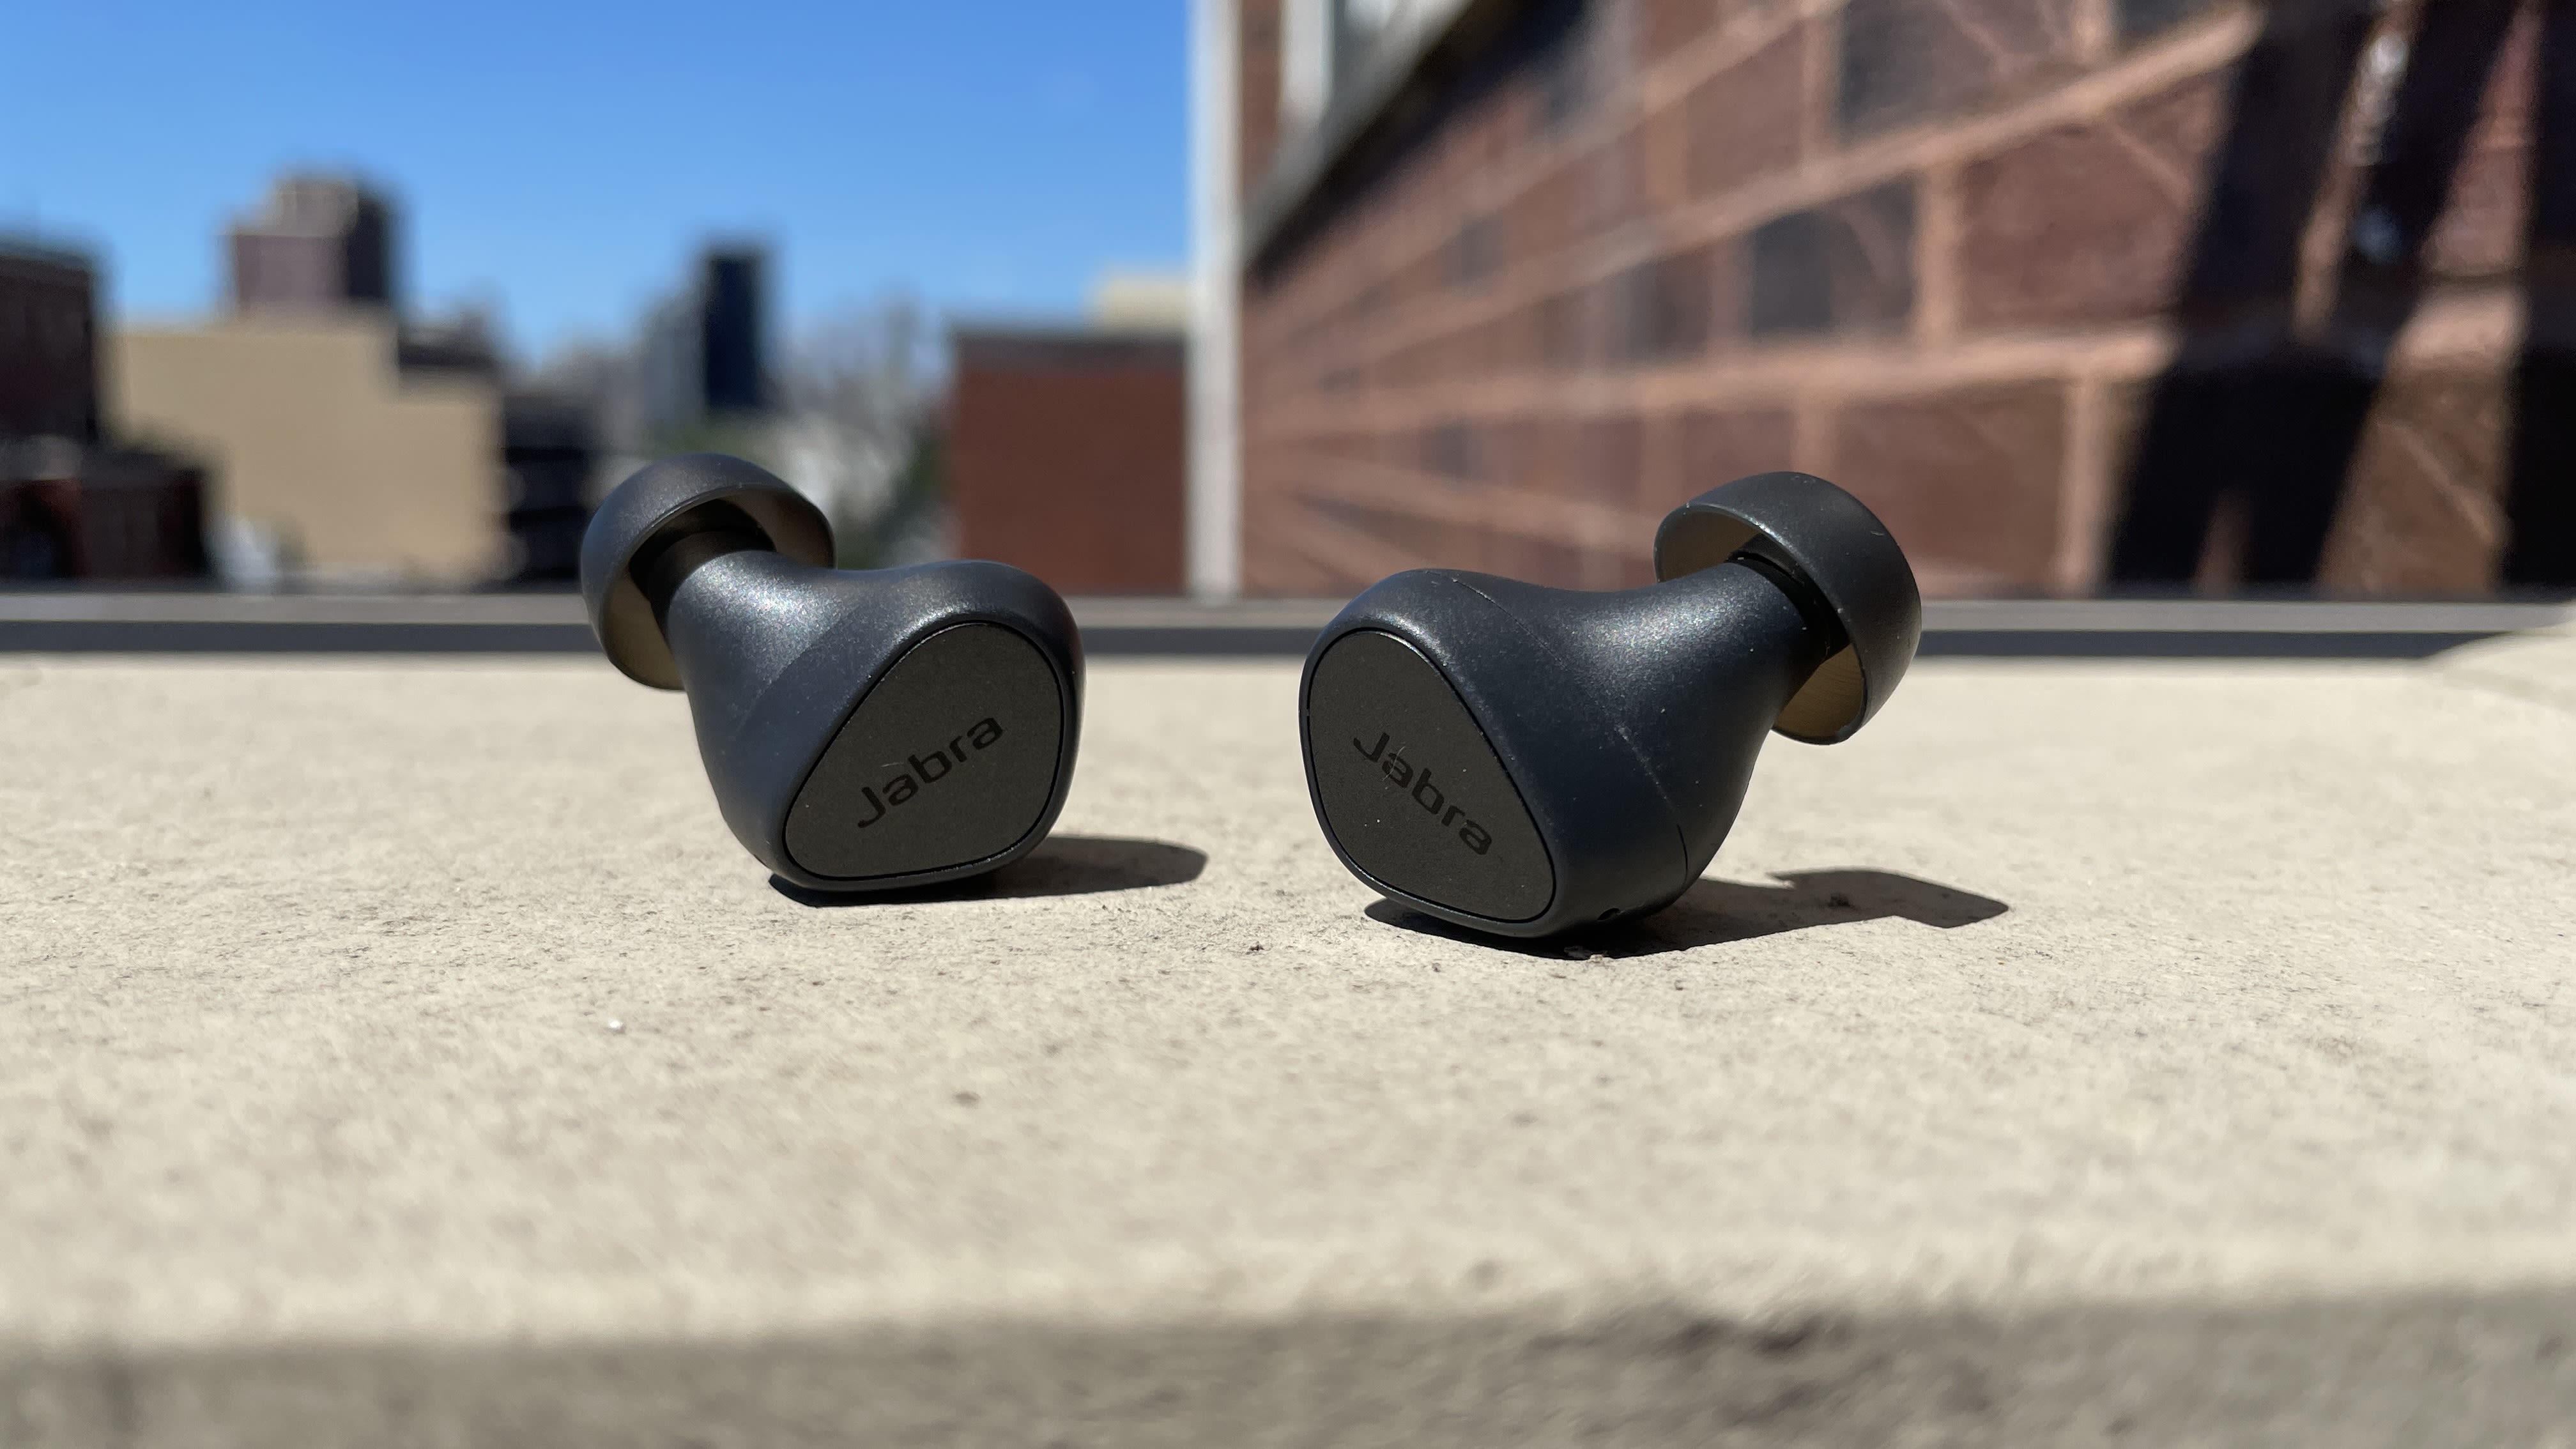 Jabra Elite 3 Review: The earbuds to beat - 9to5Google